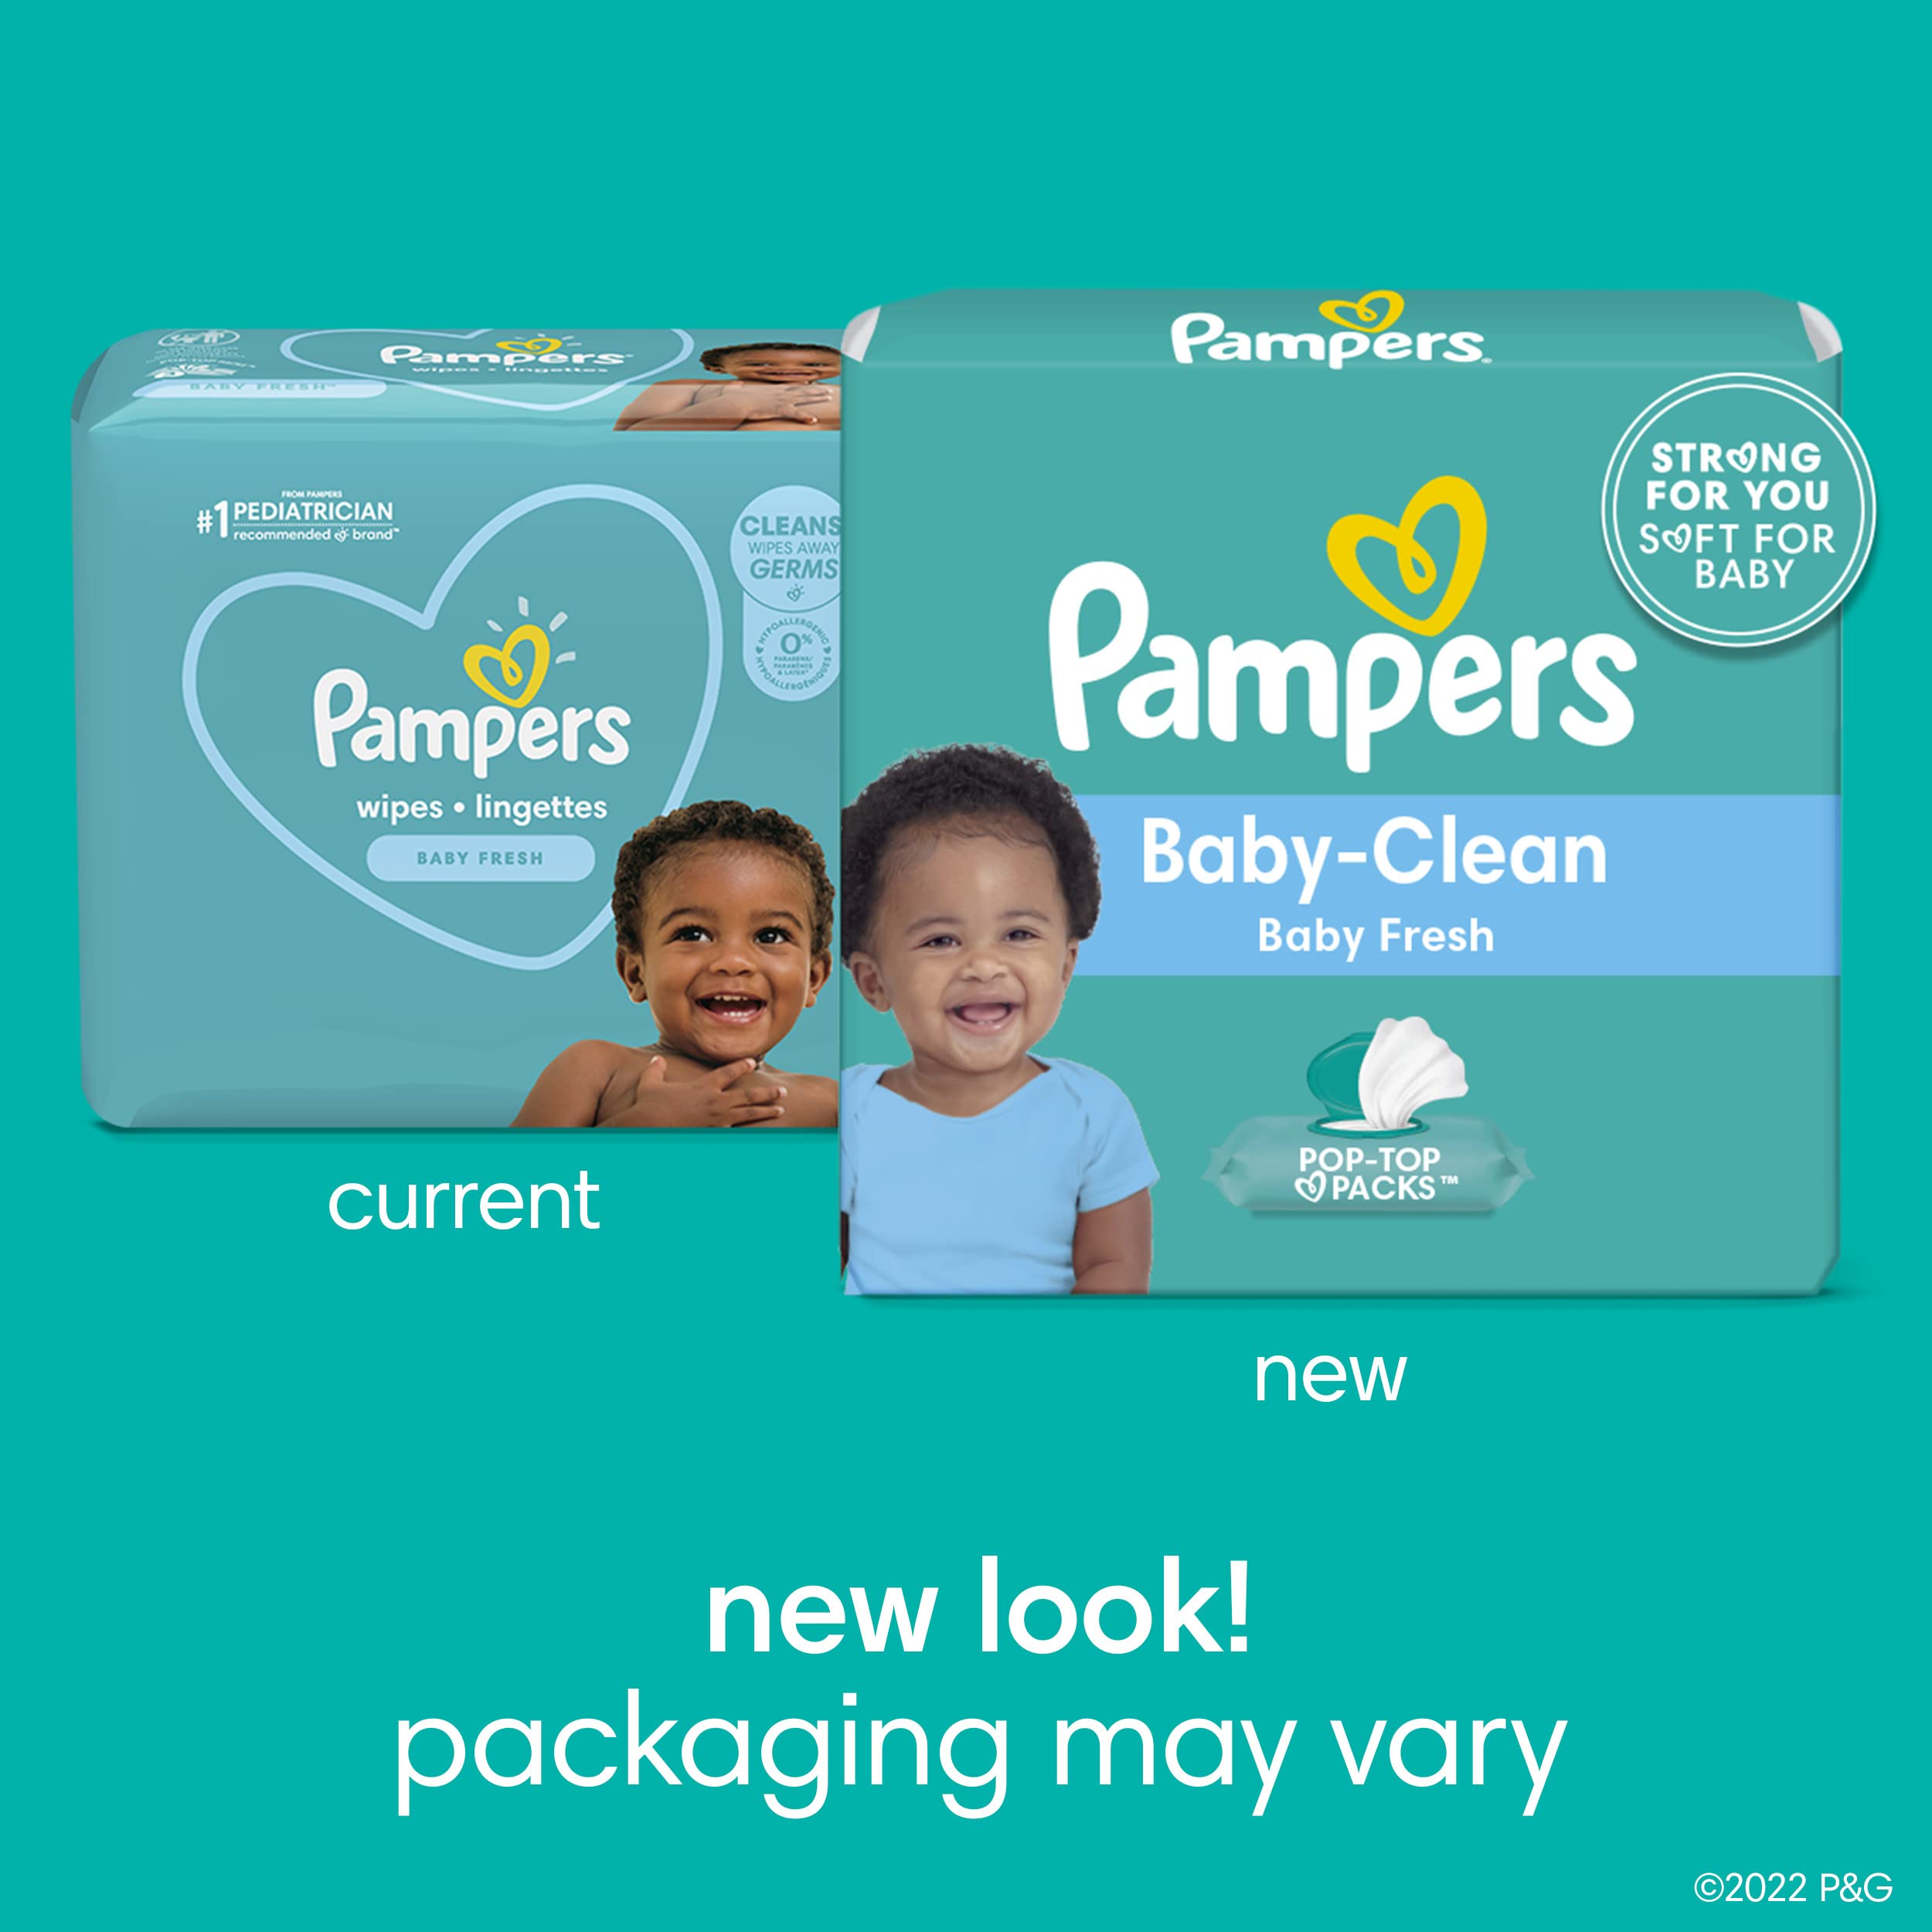 Pampers Baby Clean Wipes Baby Fresh Scented 12X Pop-Top Packs 864 Count